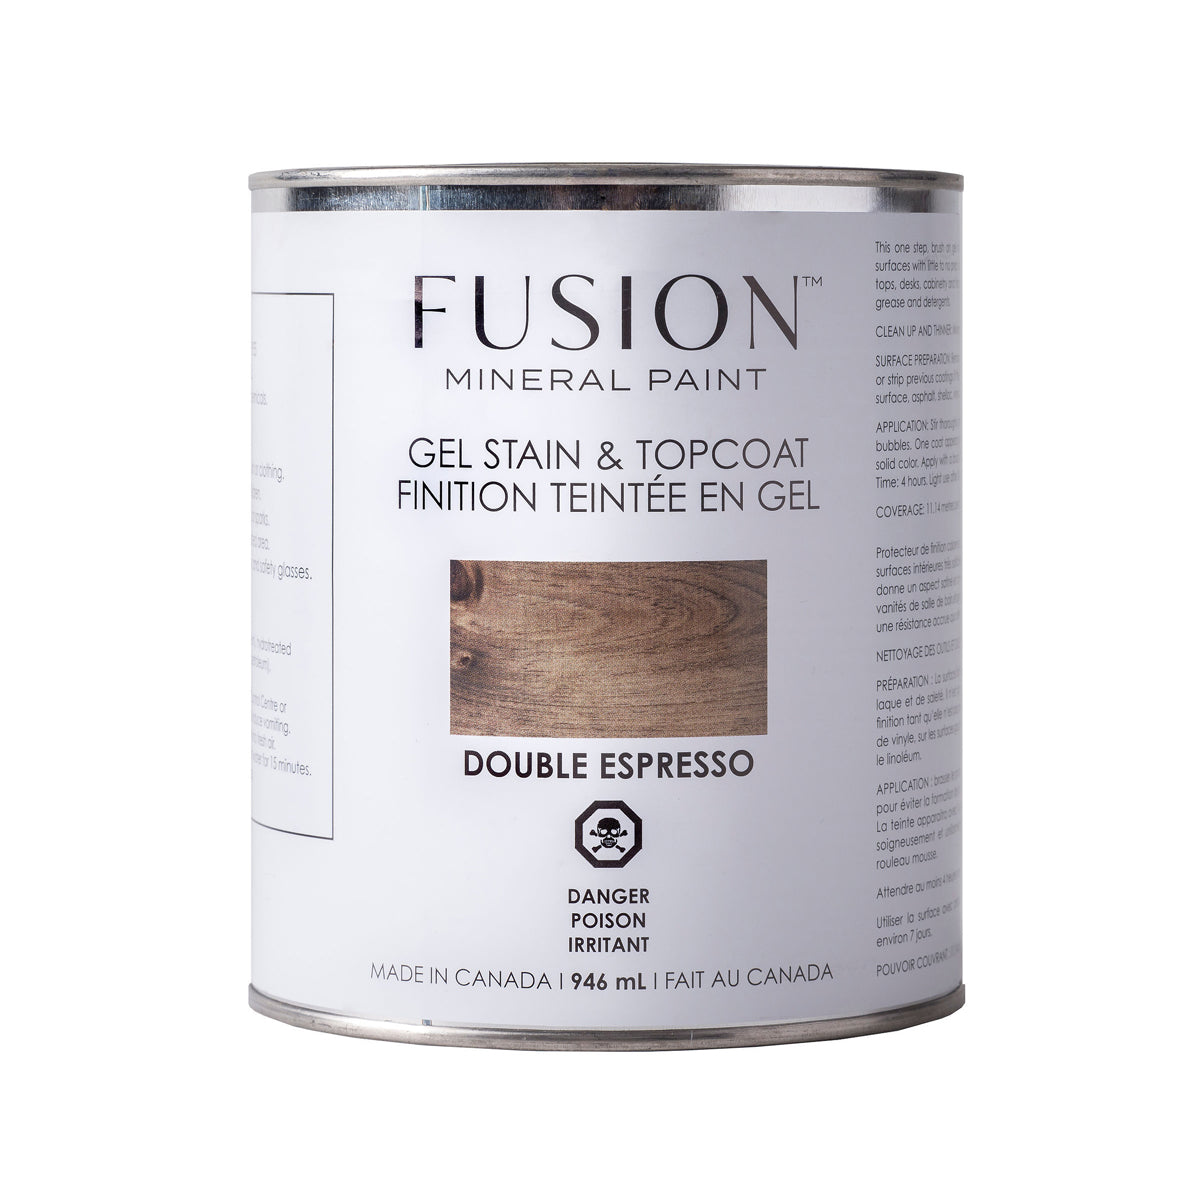 Fusion Mineral Paint™ - Gel Stain & Topcoat